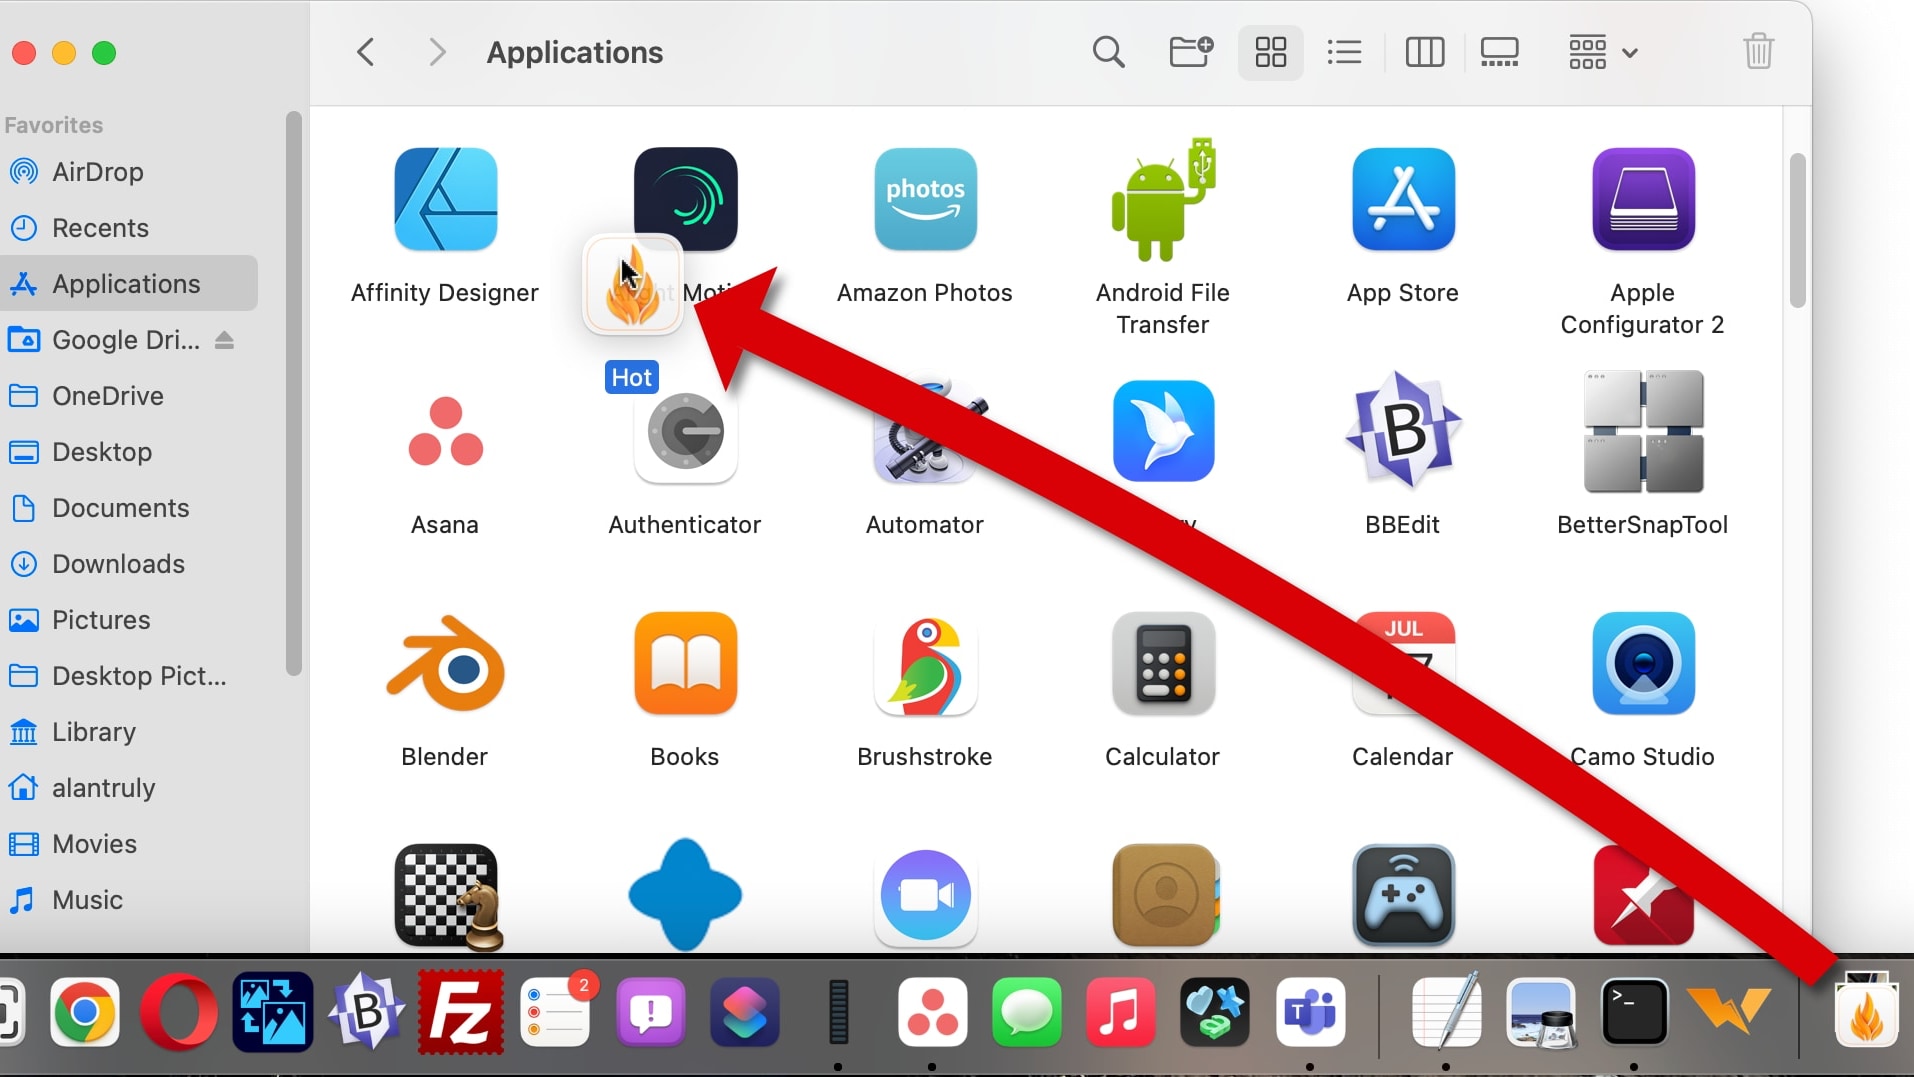 Drag the Hot app over to the Applications folder